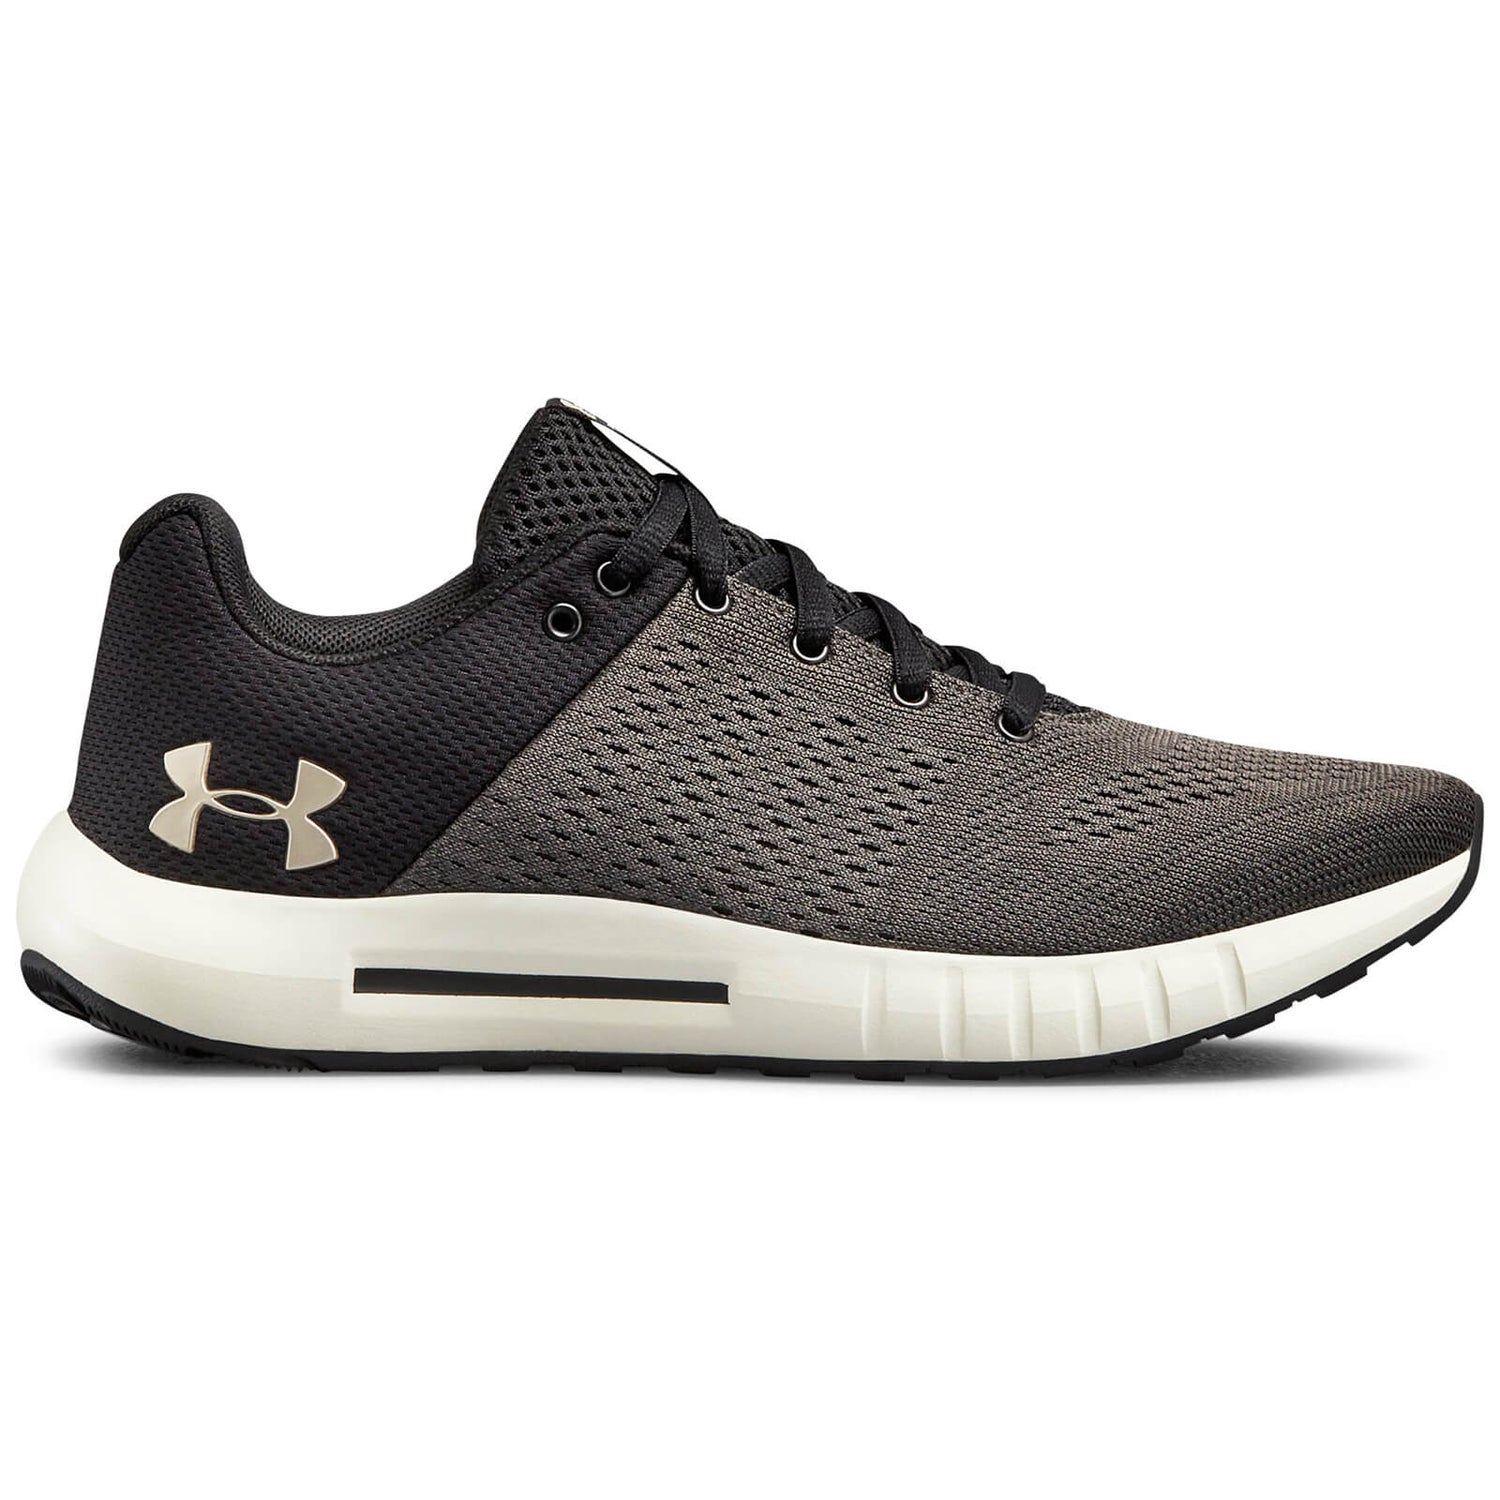 Cuna cerca creer Under Armour Women's Micro G Pursuit Running Shoes - Black/Gold |  ProBikeKit.com